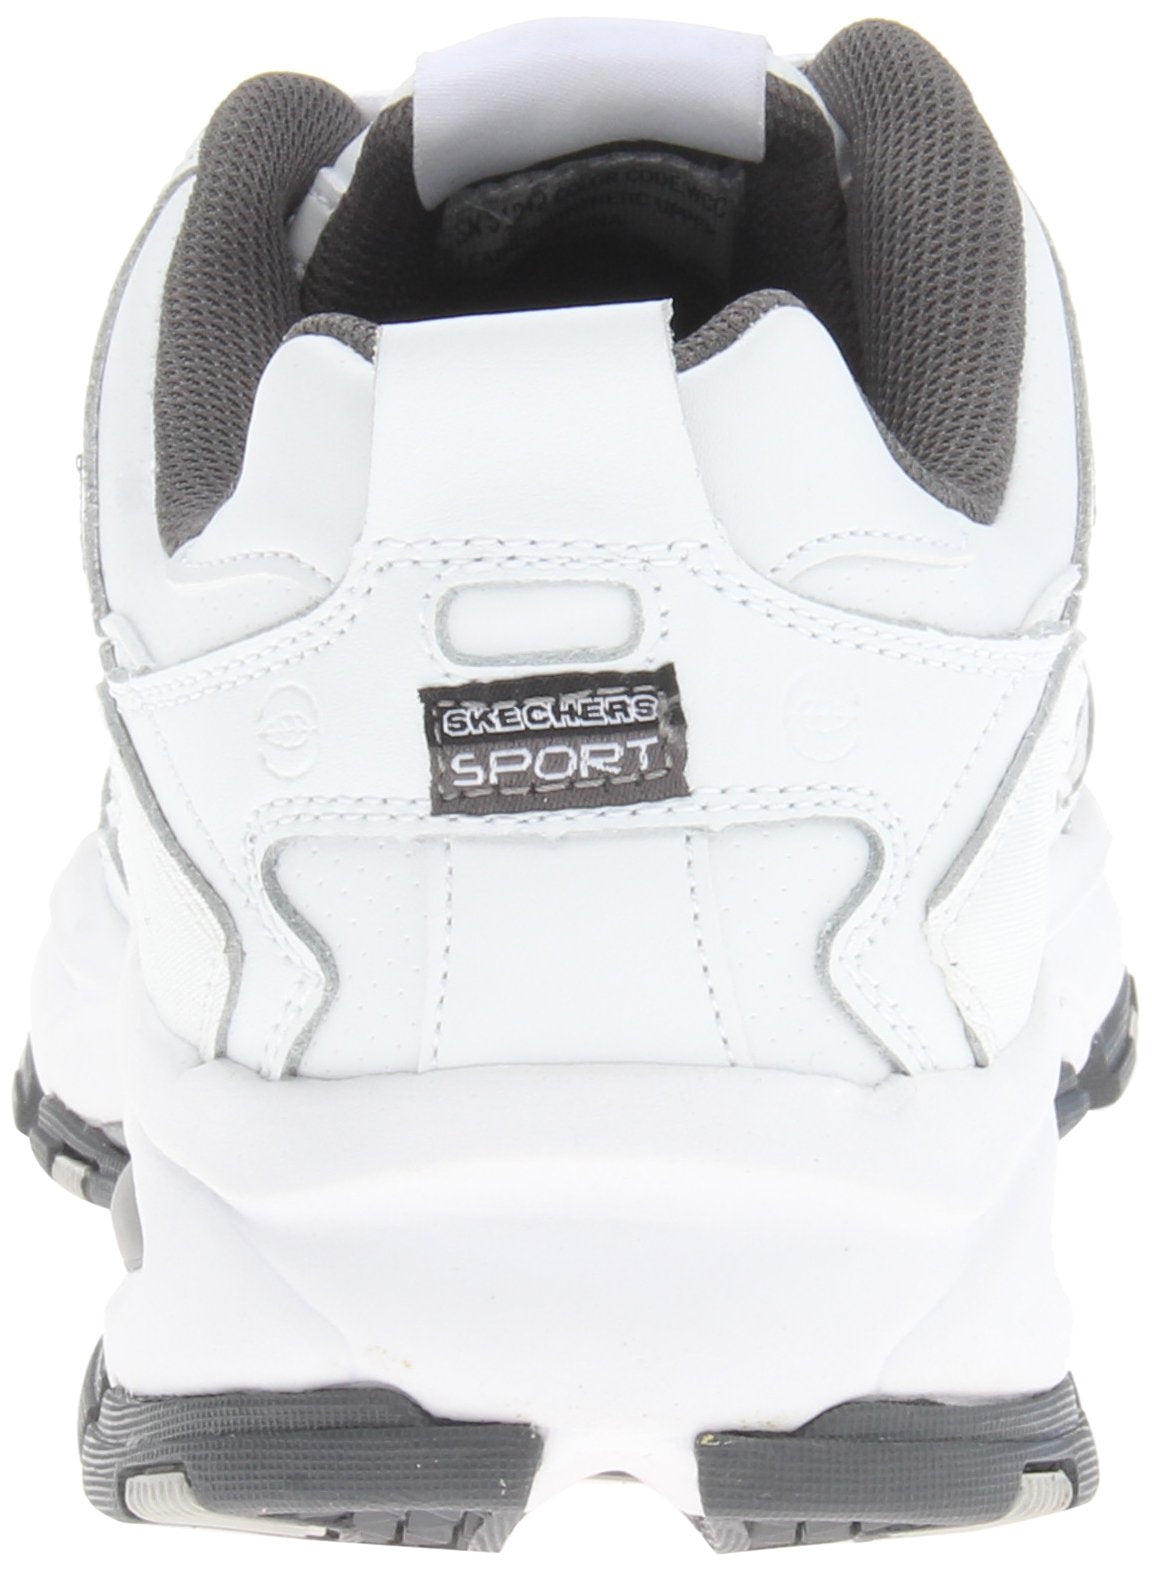 Skechers Men's White And Charcoal Low-top Sneaker - 9.5 D(M) US